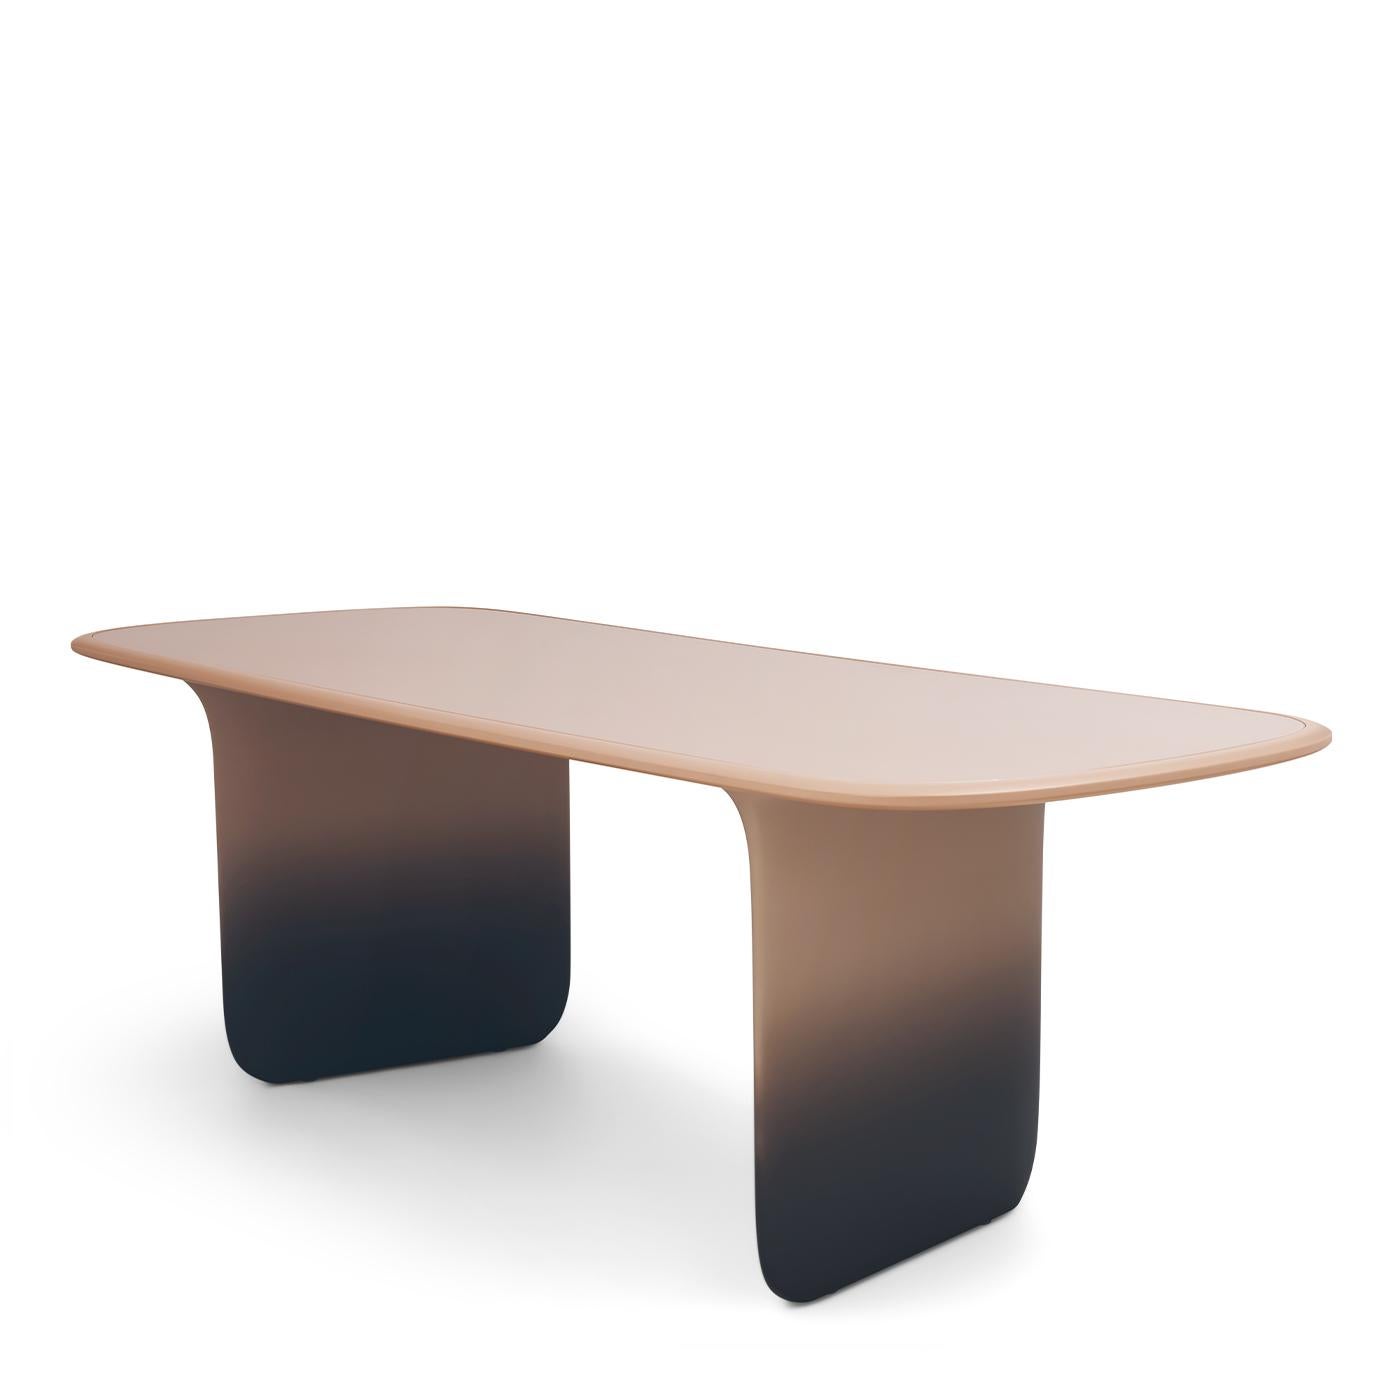 The shaded lacquering technique gives the thin legs of the table a striking geometric lightness and makes it an illusion that the top is floating.